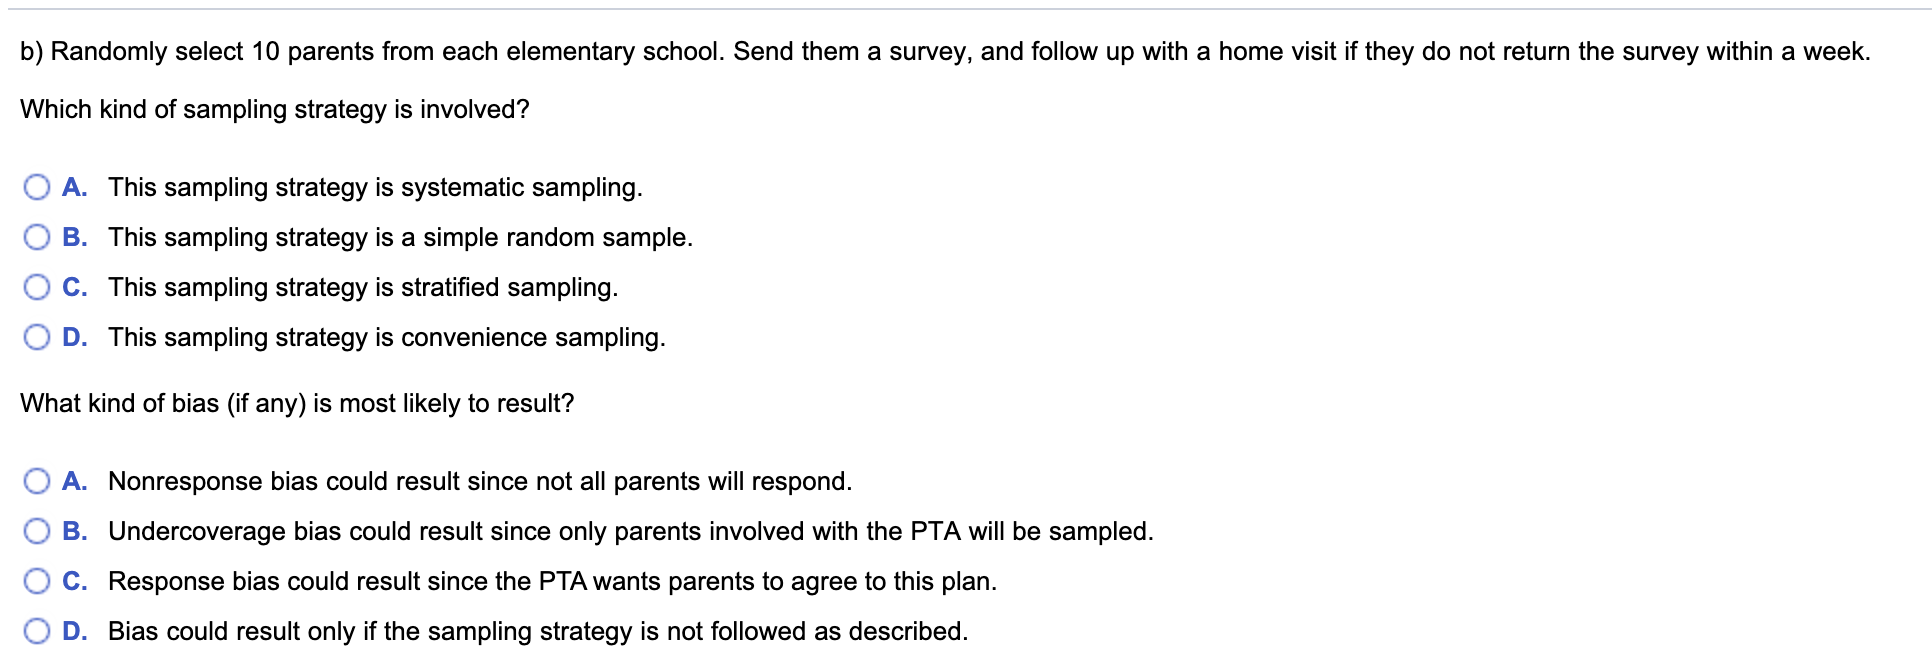 bristol township school district how to determine which school my child would attend